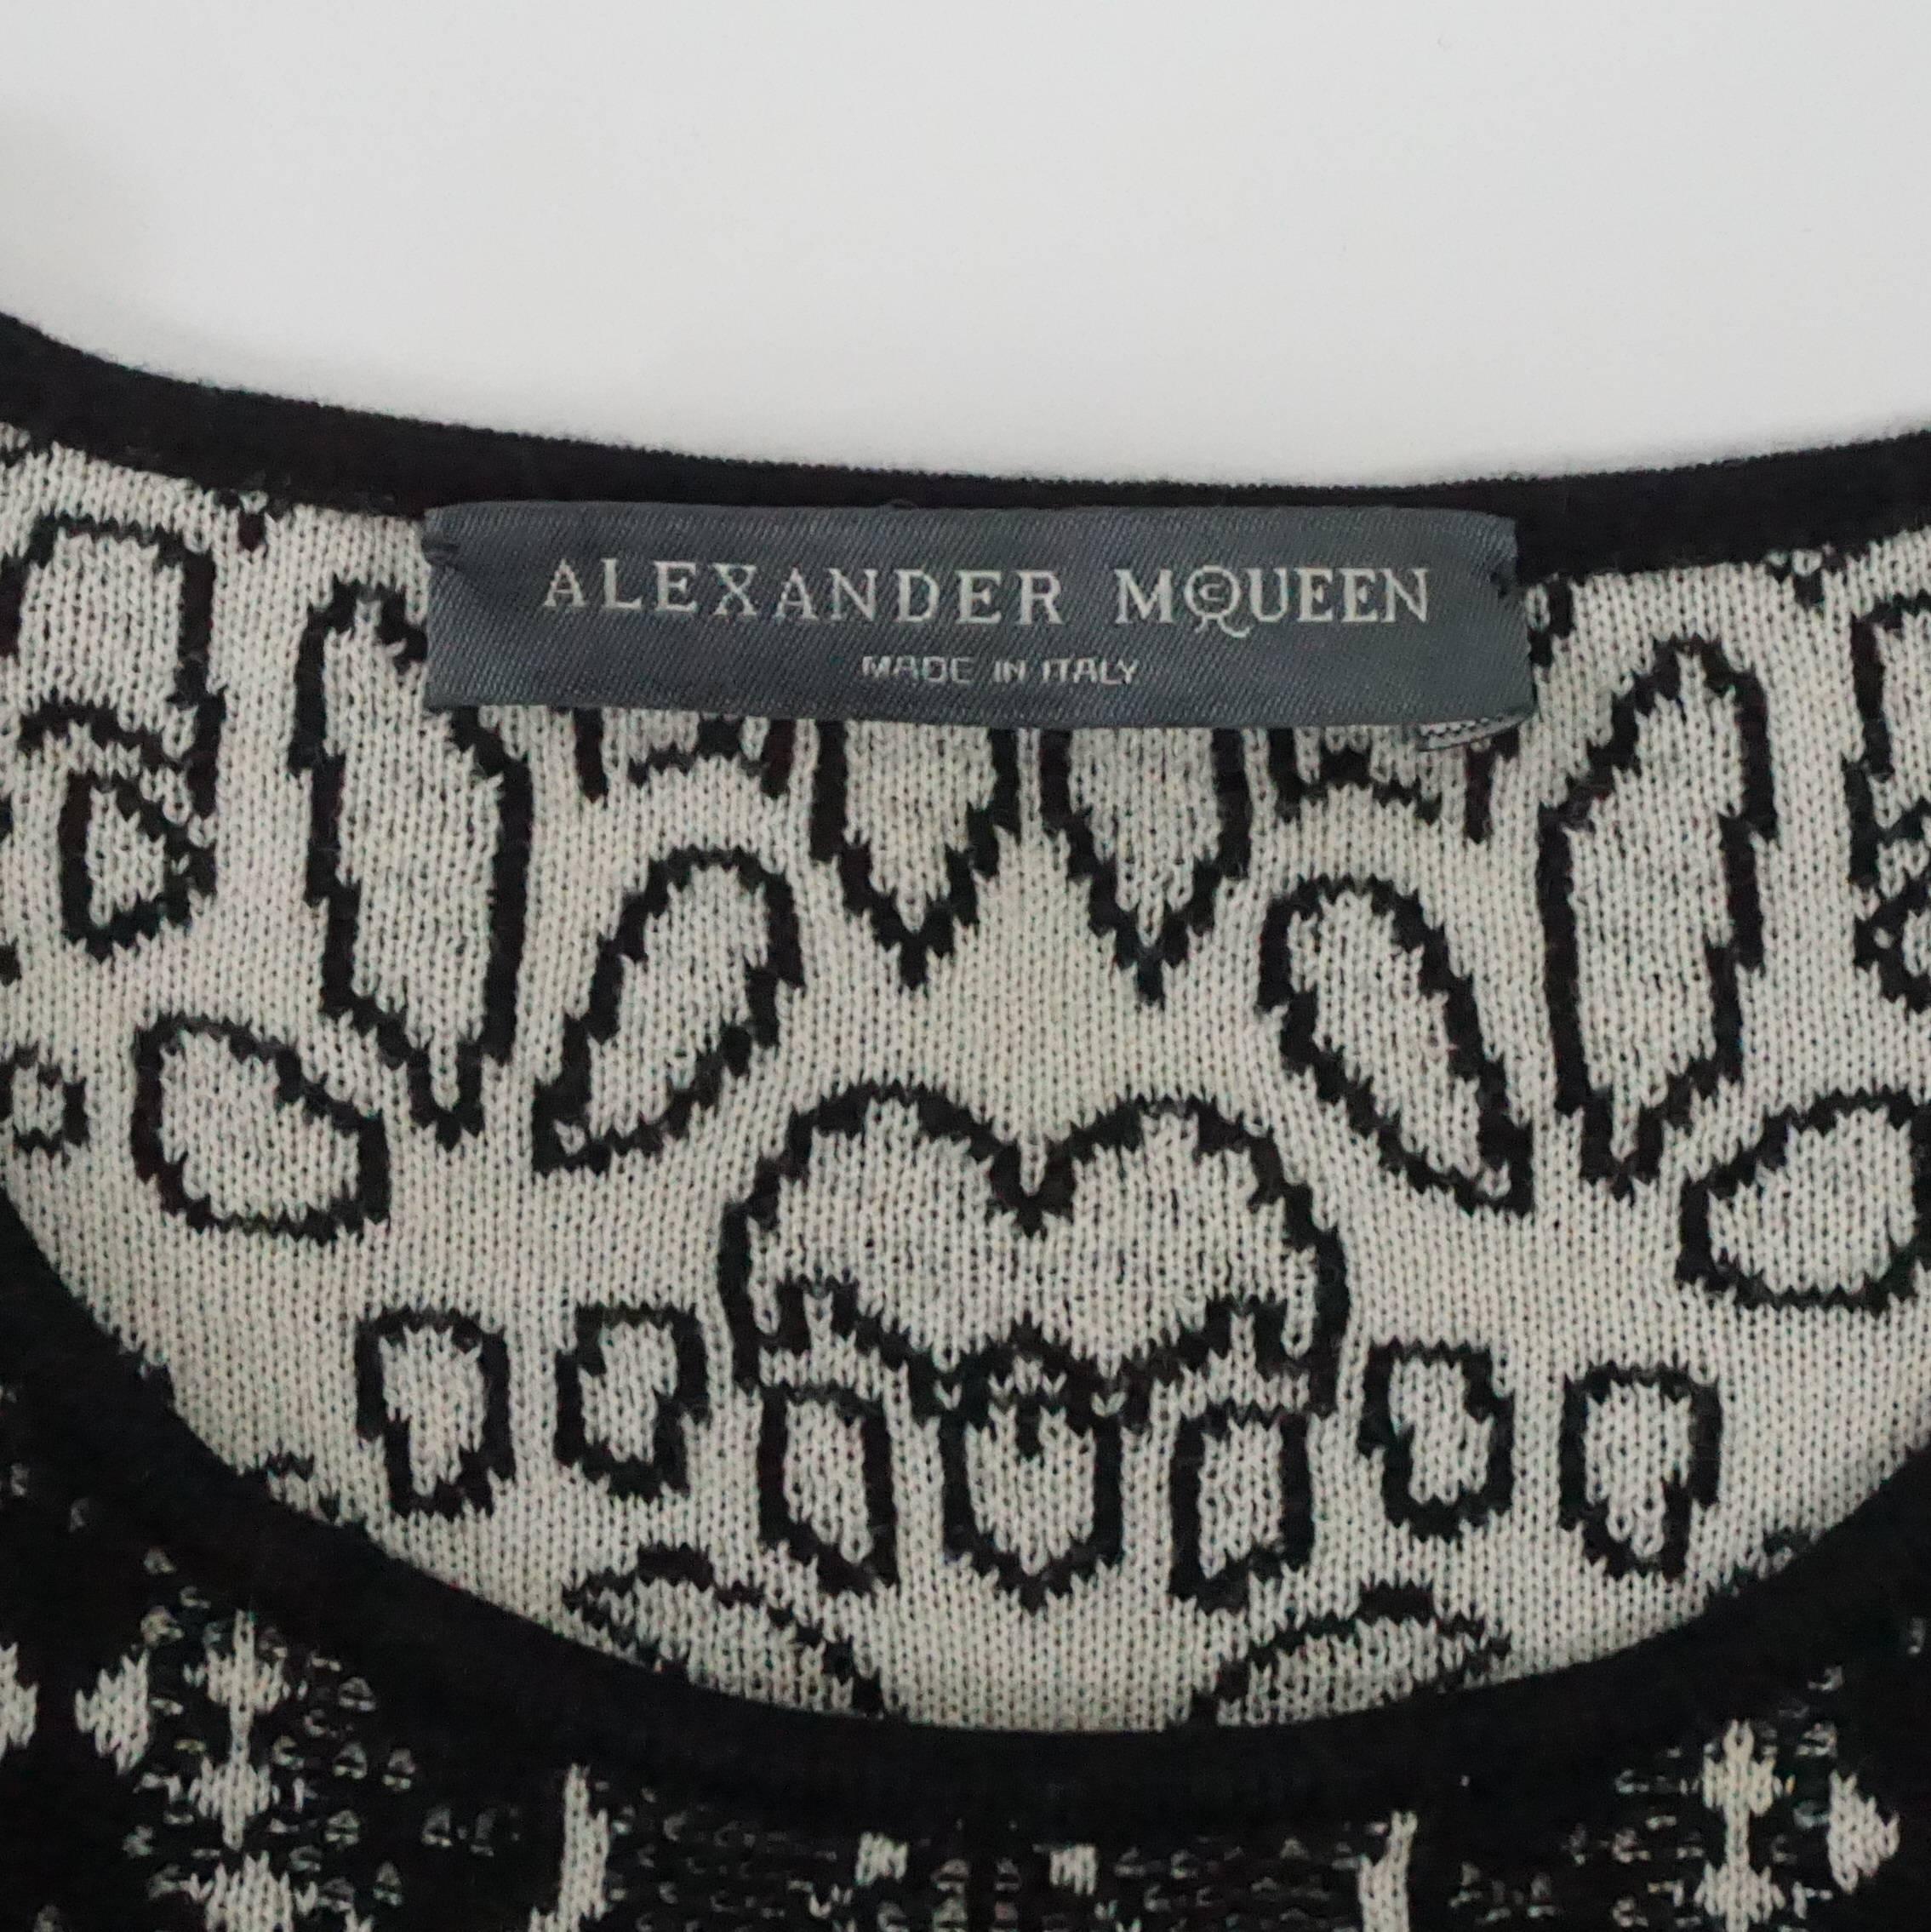 Alexander McQueen Black and Ivory Patterned Silk Knit Dress - Small 1